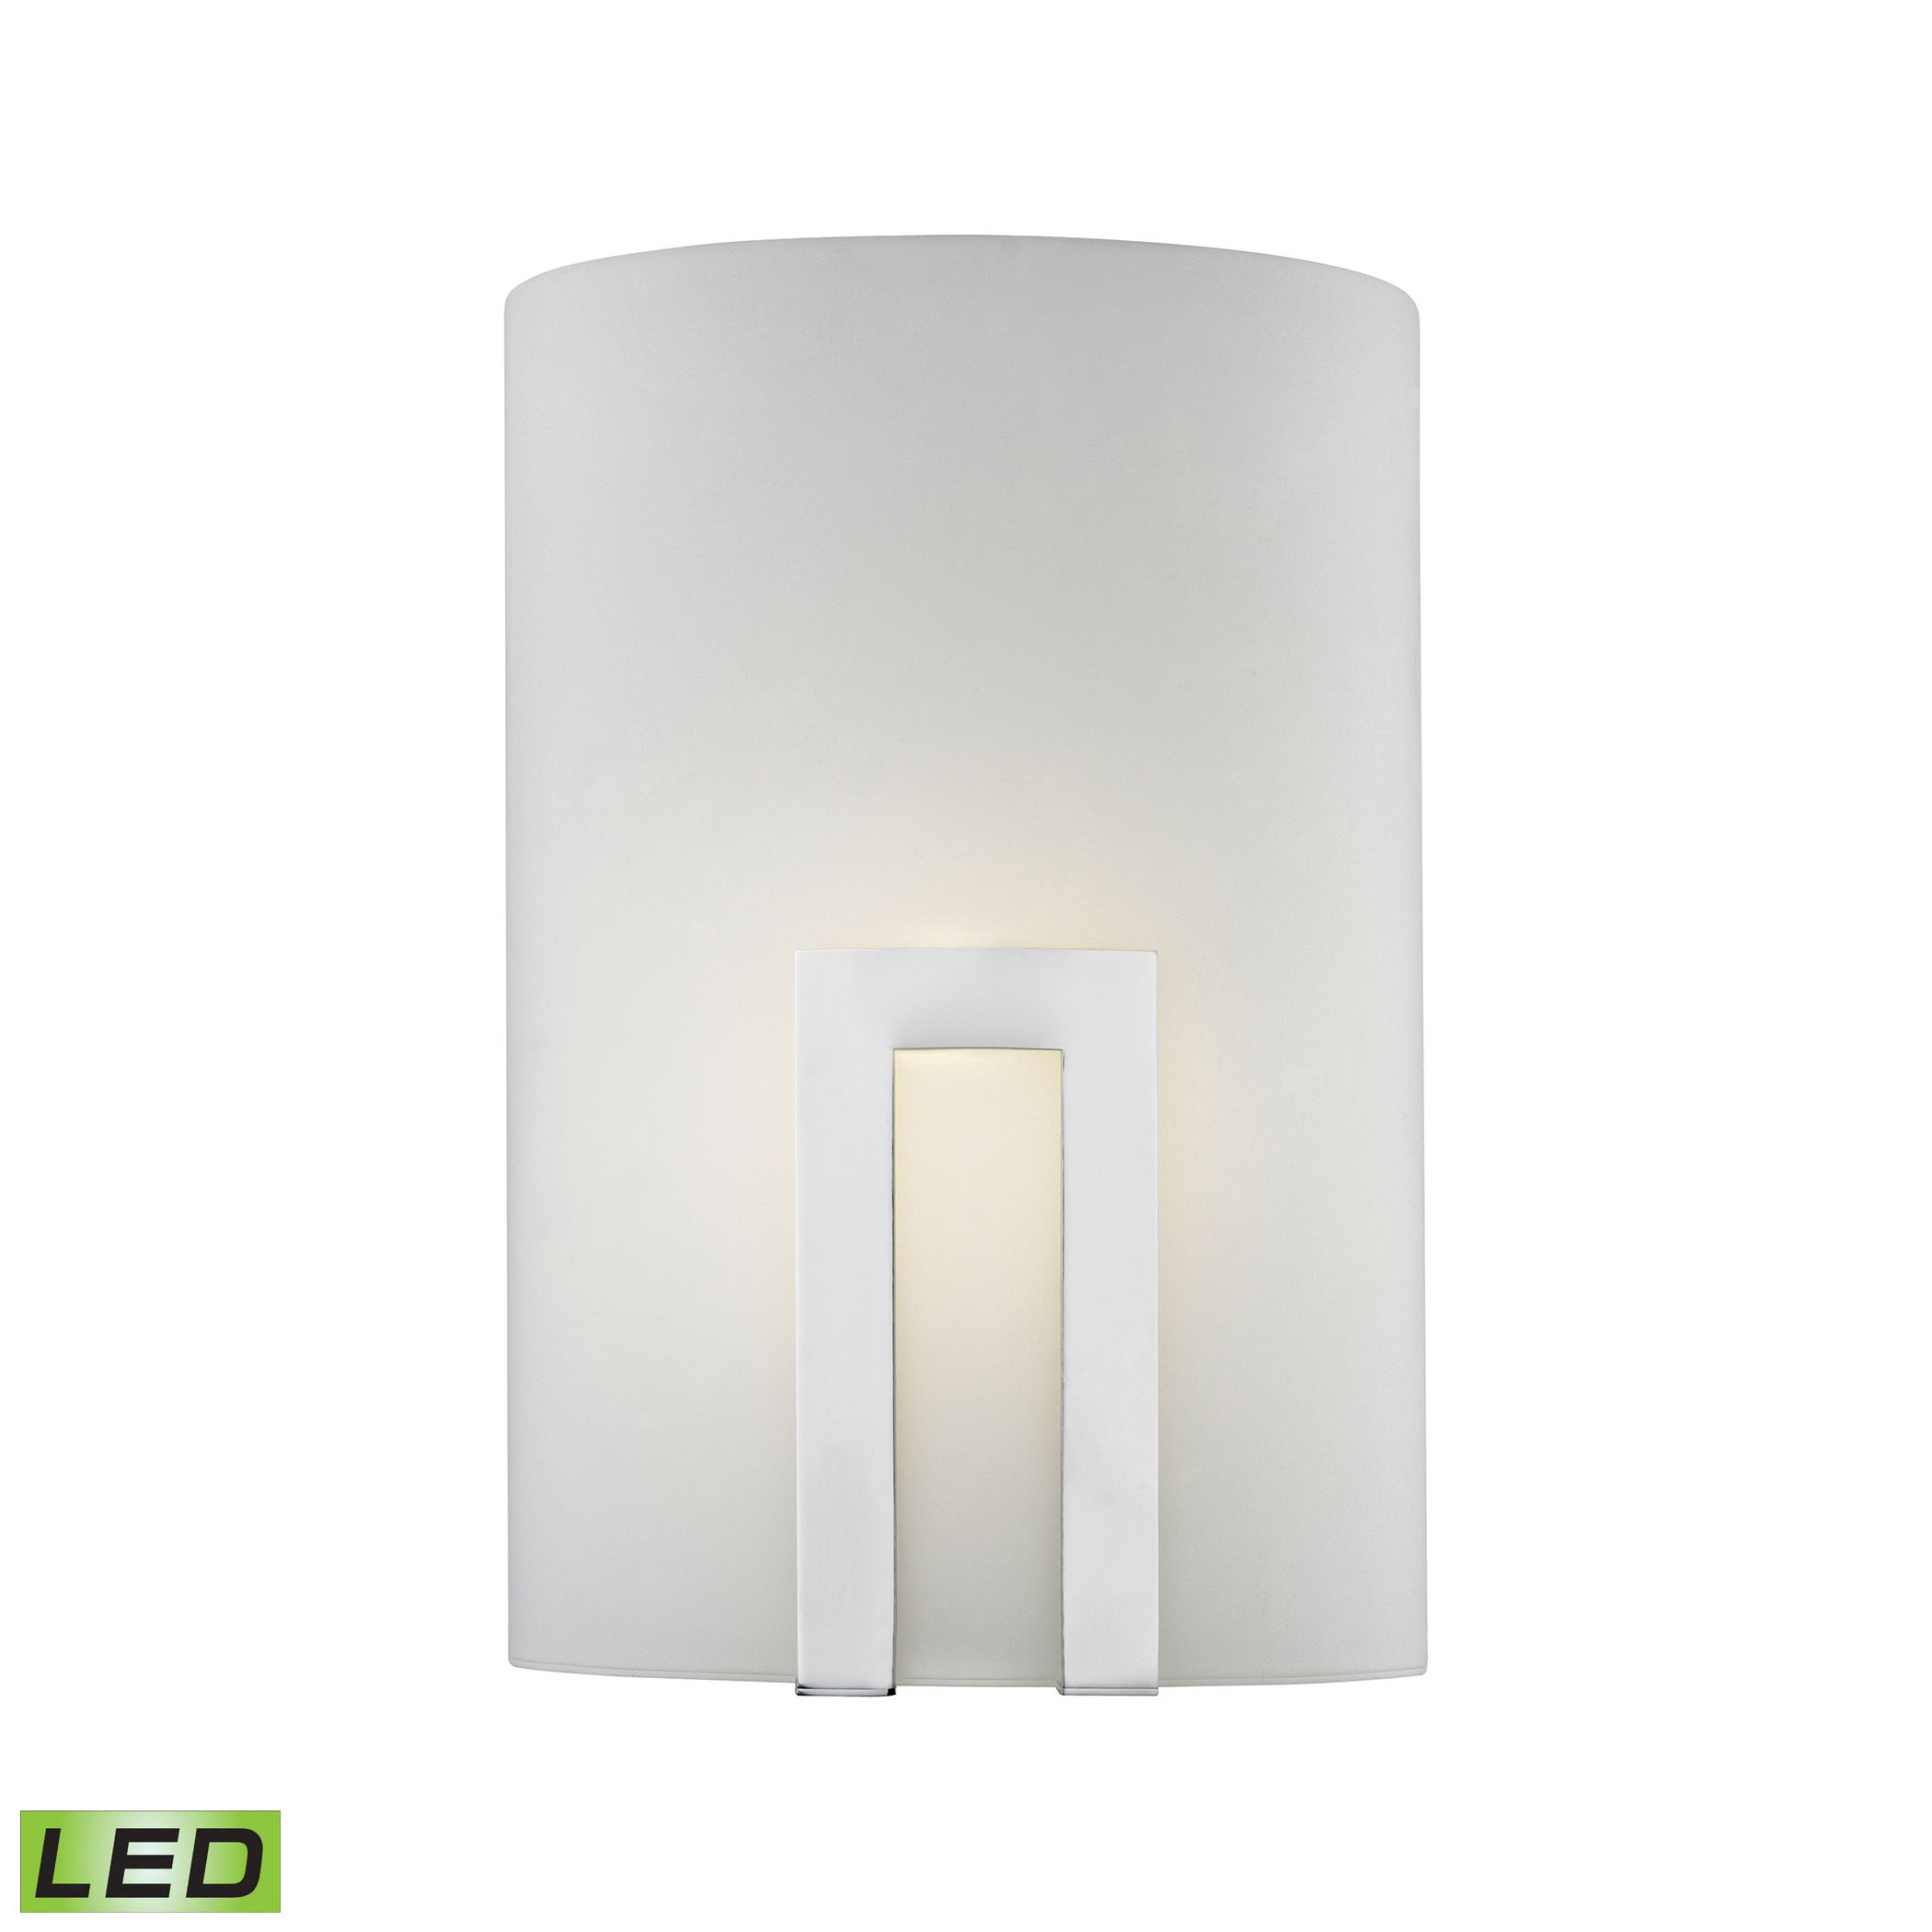 Portal 1-Light Sconce in Chrome with White Frosted Glass Diffuser - Integrated LED_WLS140-5-15